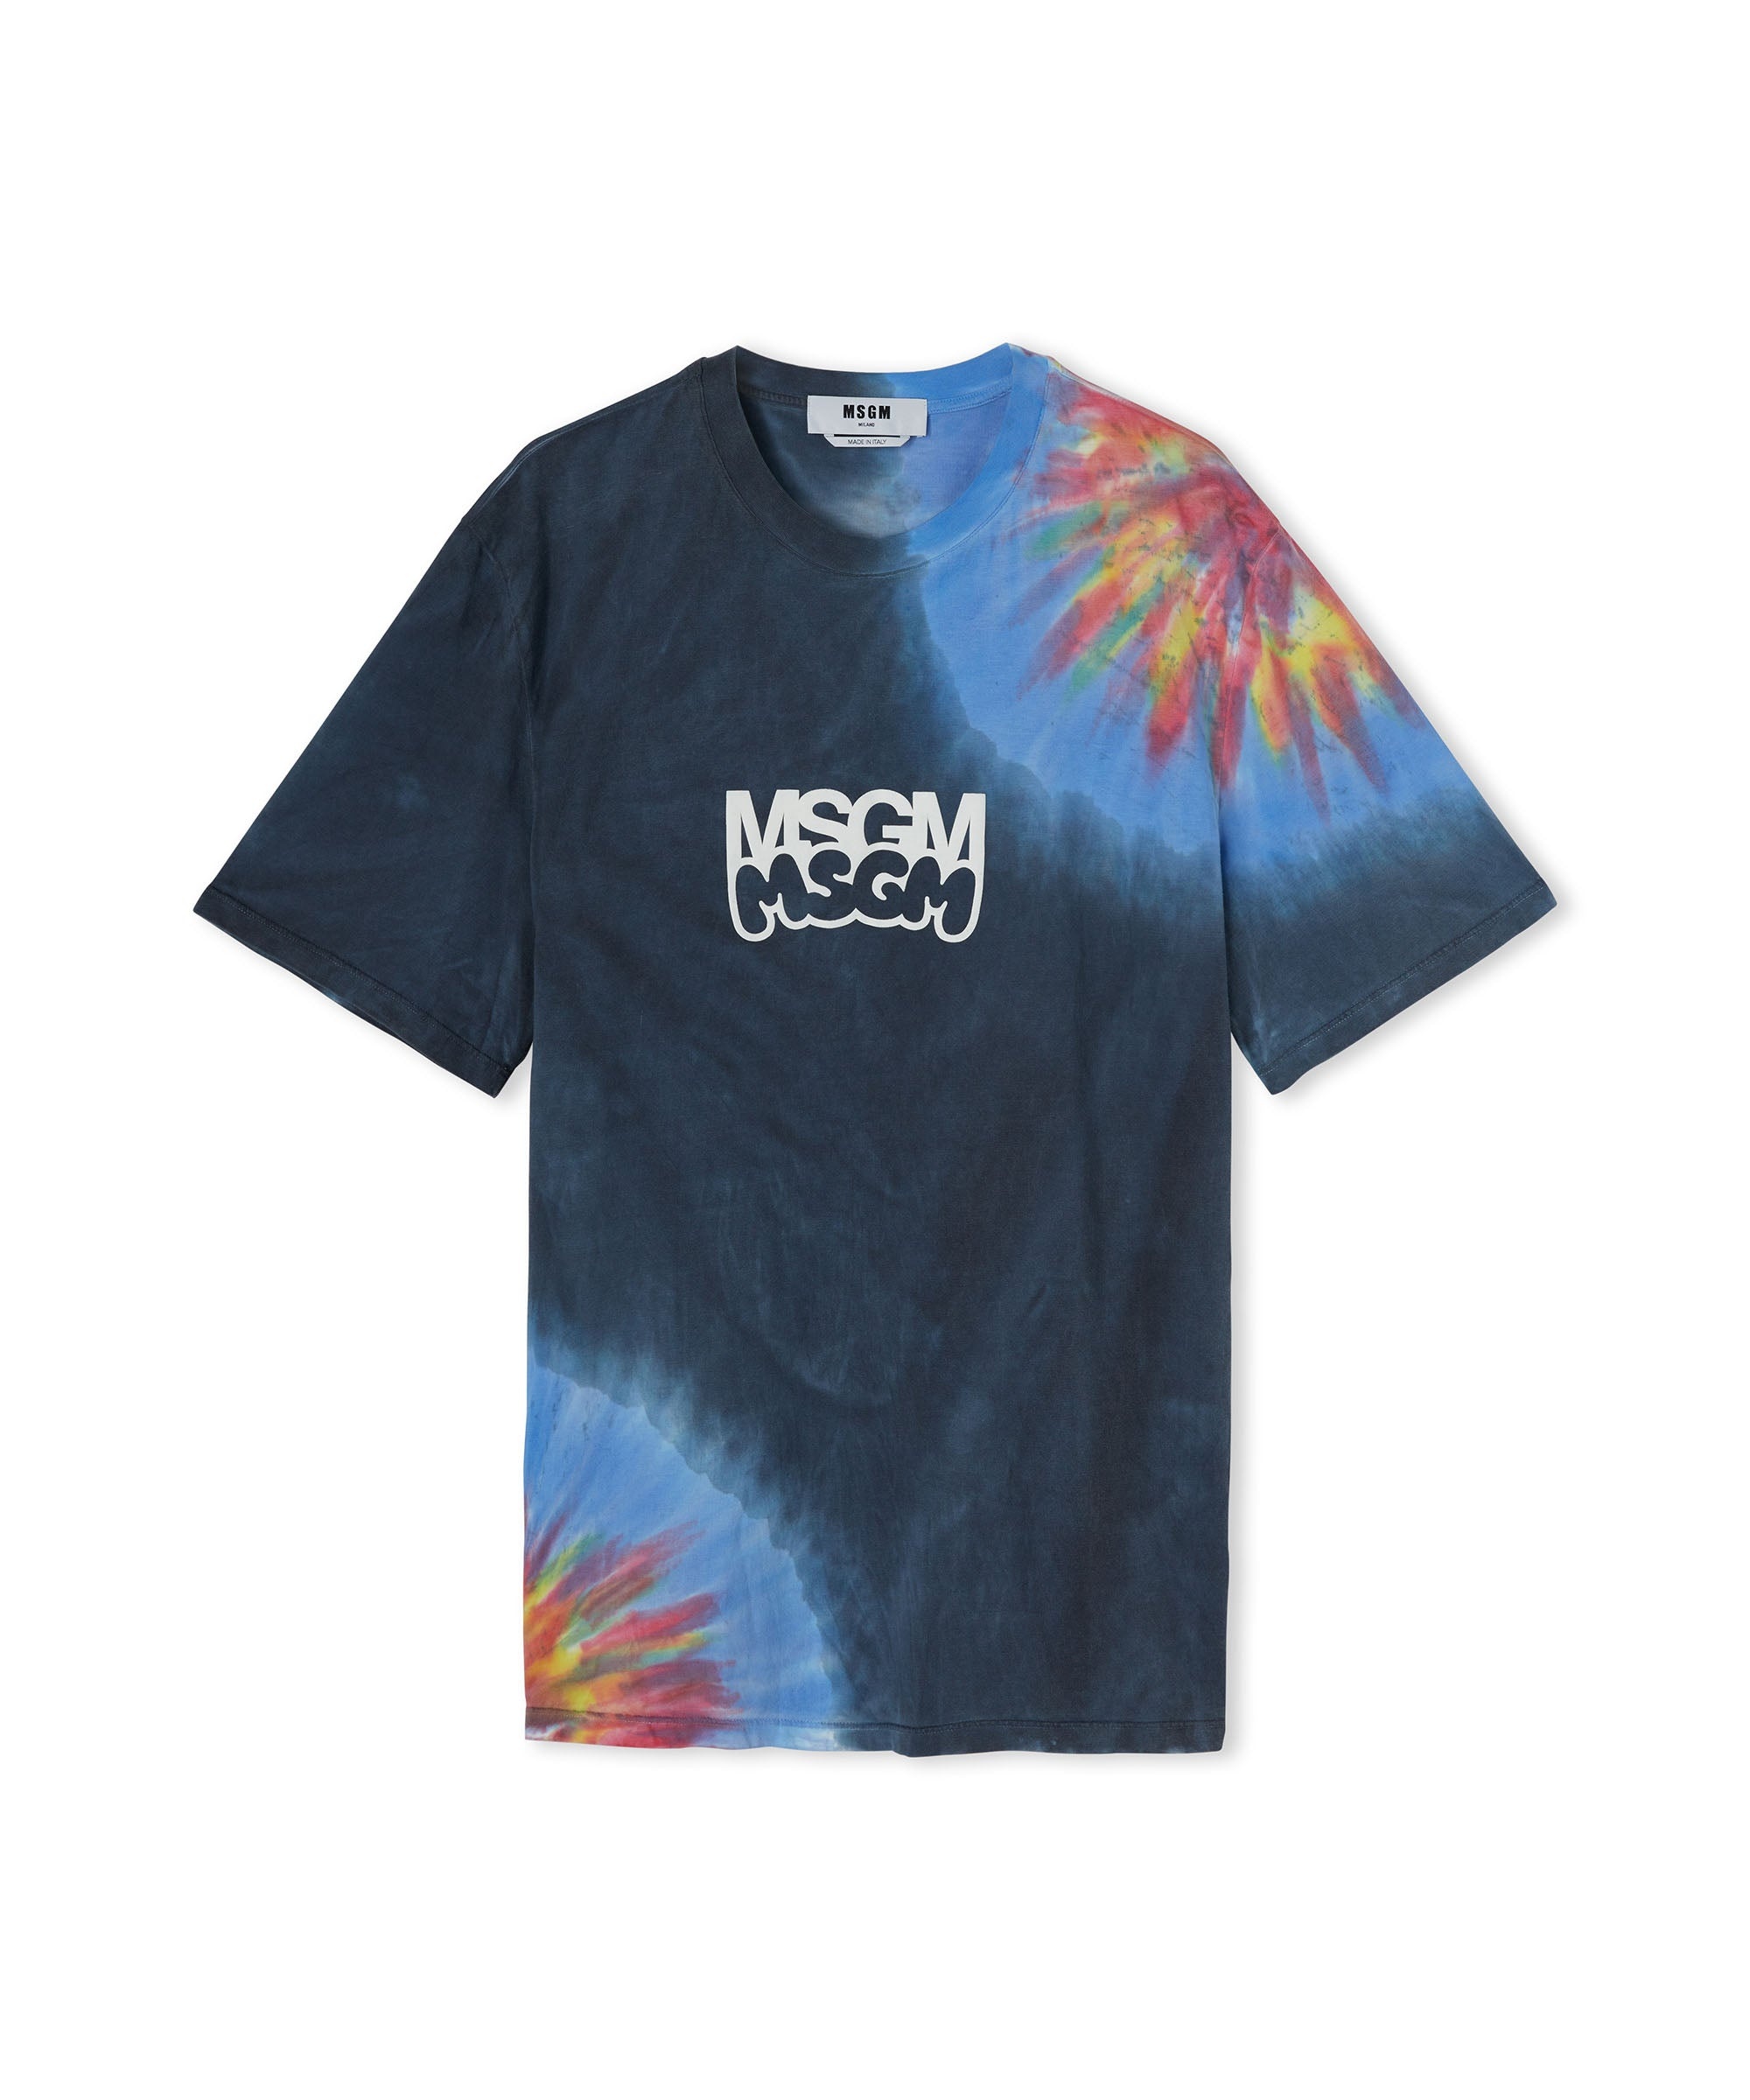 MSGM Tie dye cotton crewneck t-shirt with logo and graphics in